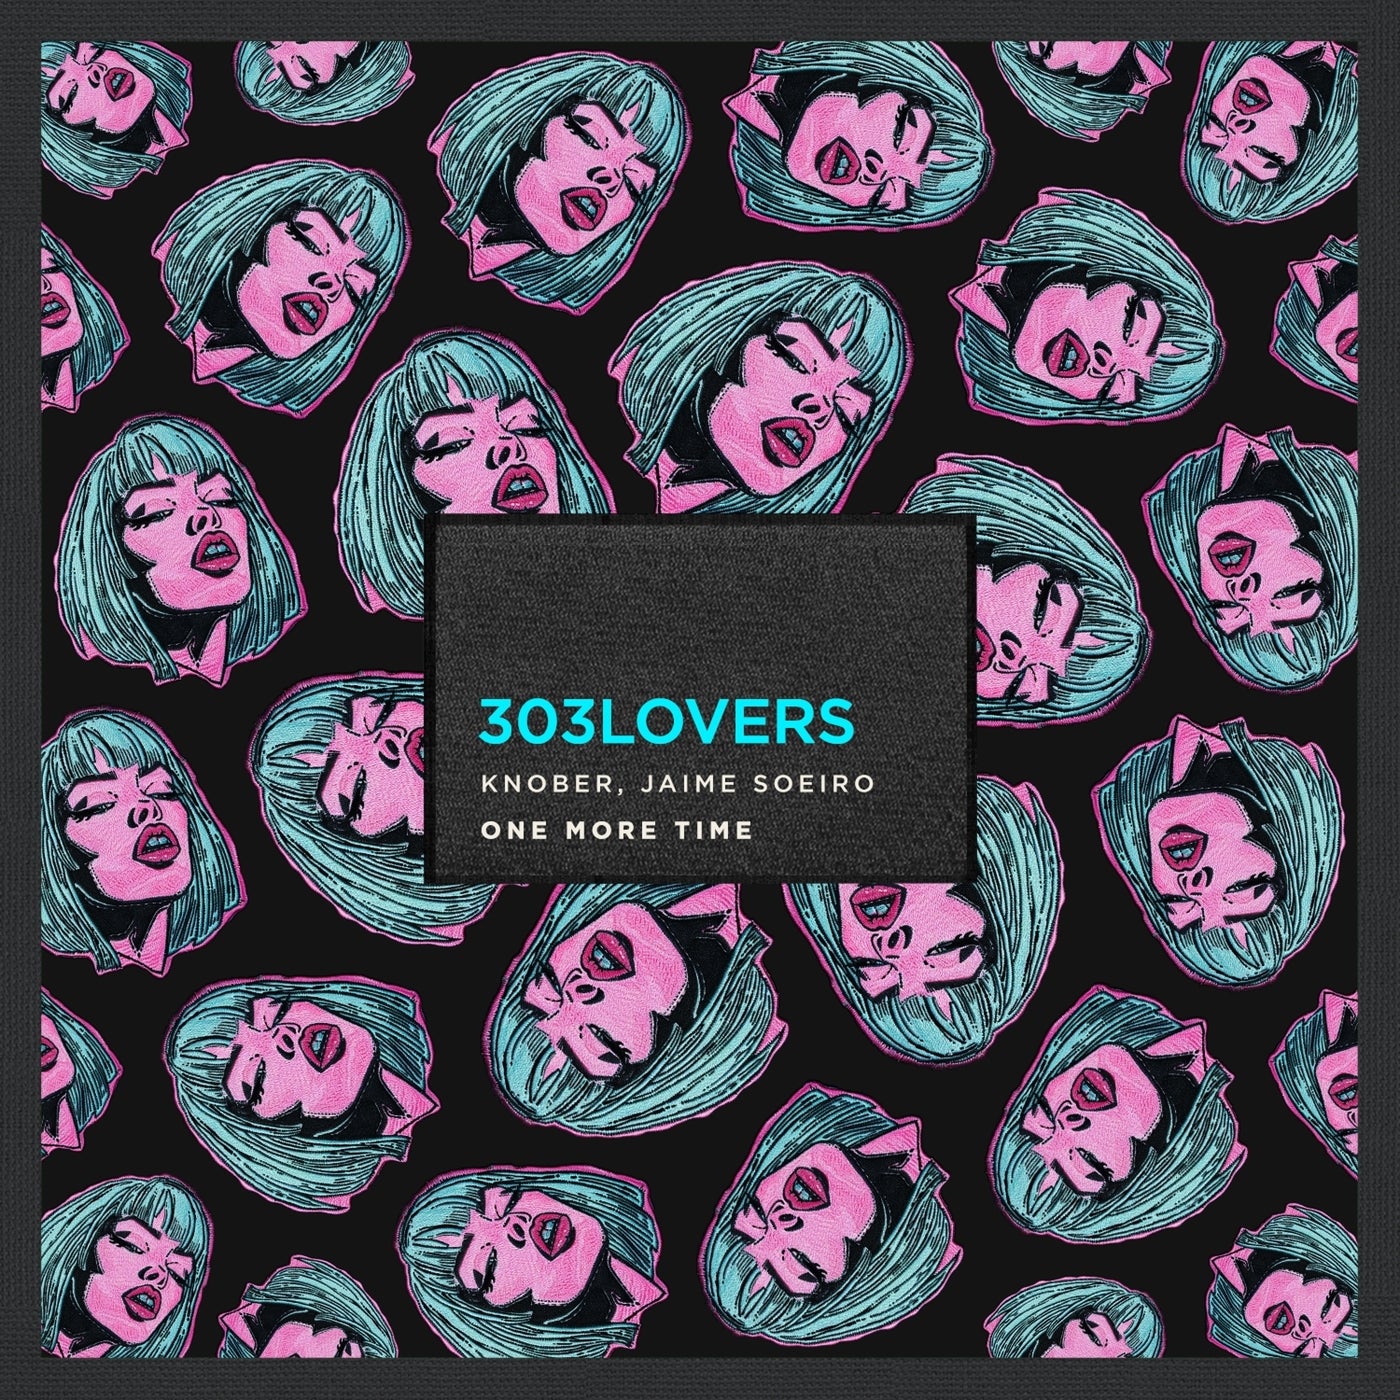 image cover: Knober - One More Time on 303Lovers